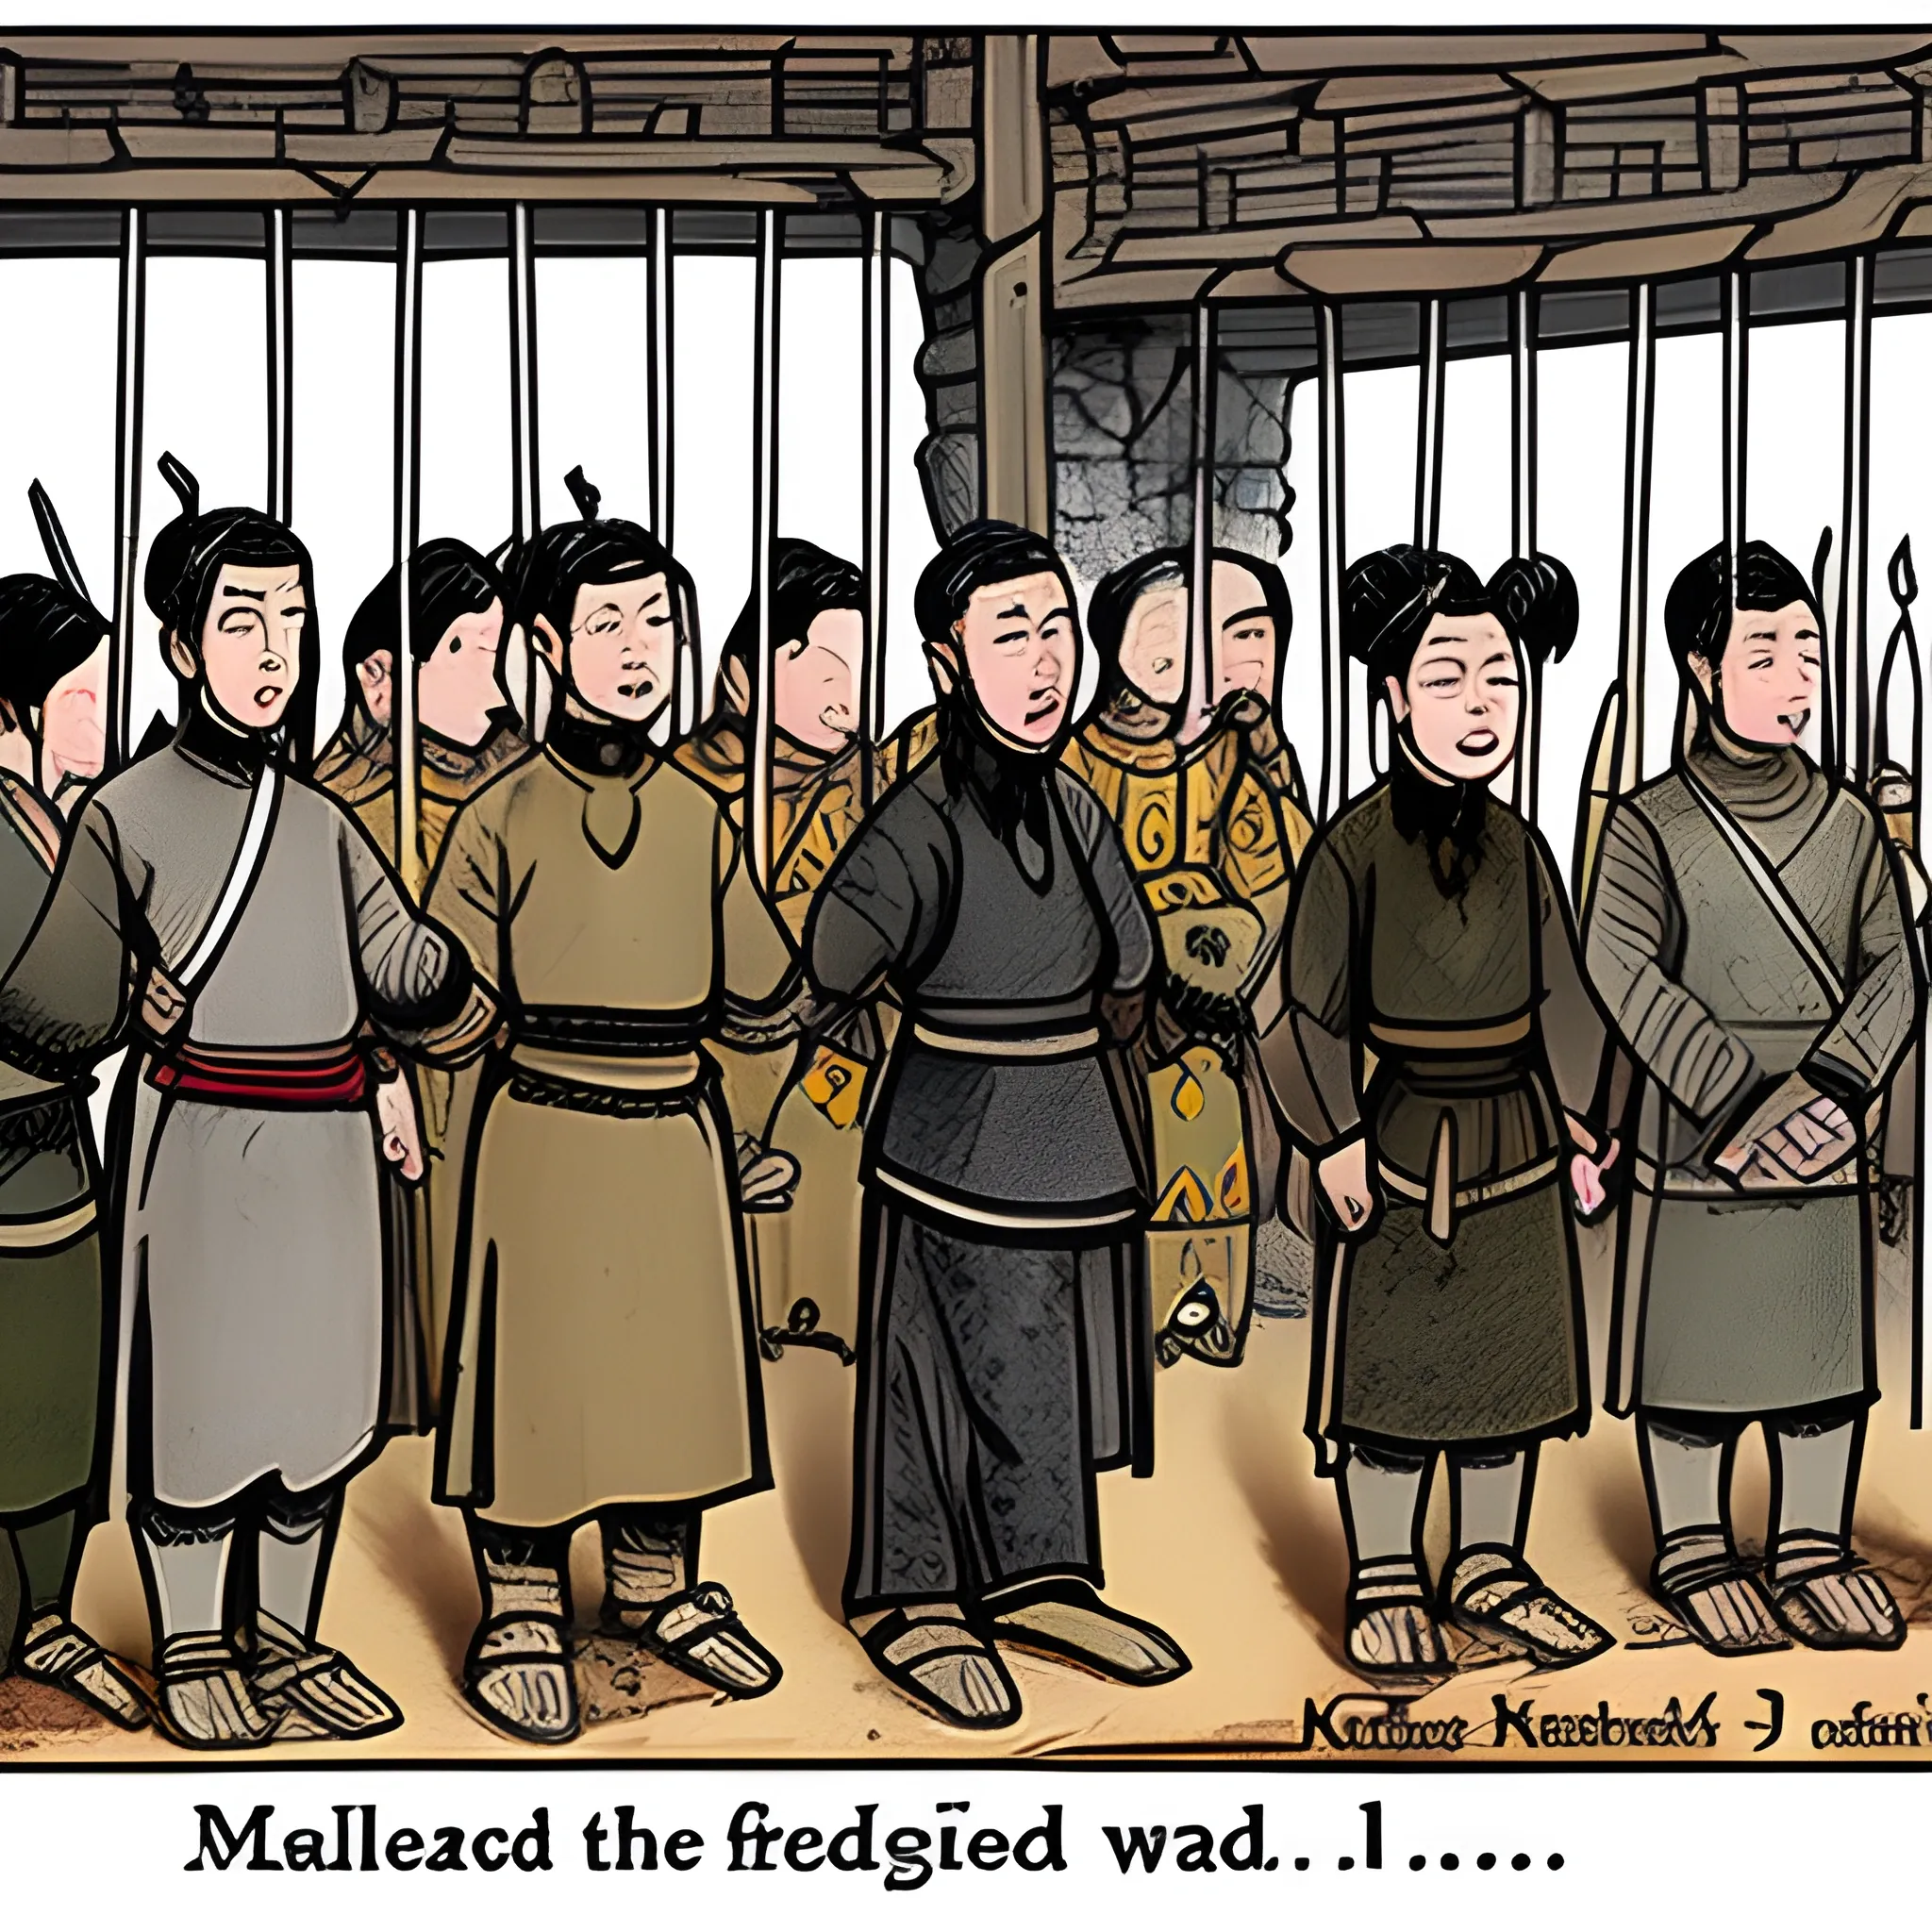 medieval Chinese prisoners captured in war and prisoned

, Cartoon